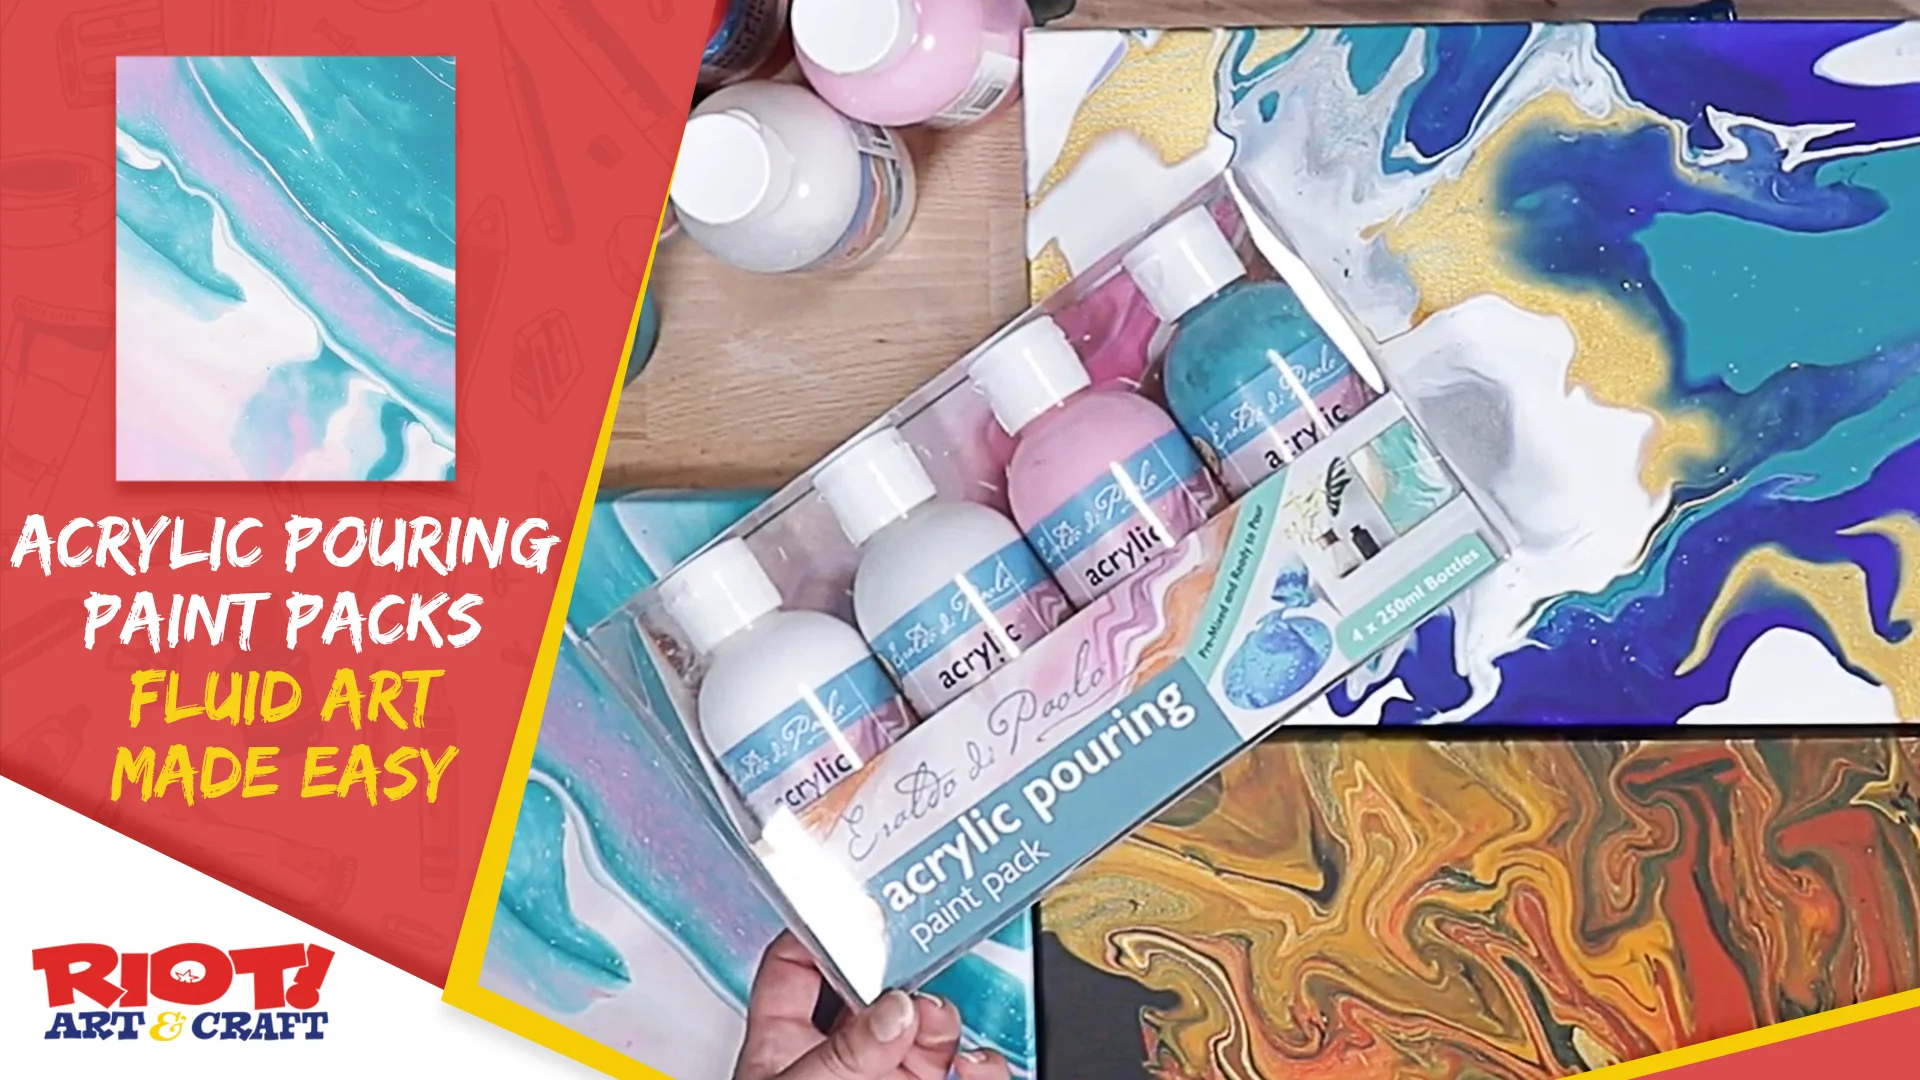 Acrylic Pouring Paint Packs - Fluid Art Made EASY on Vimeo